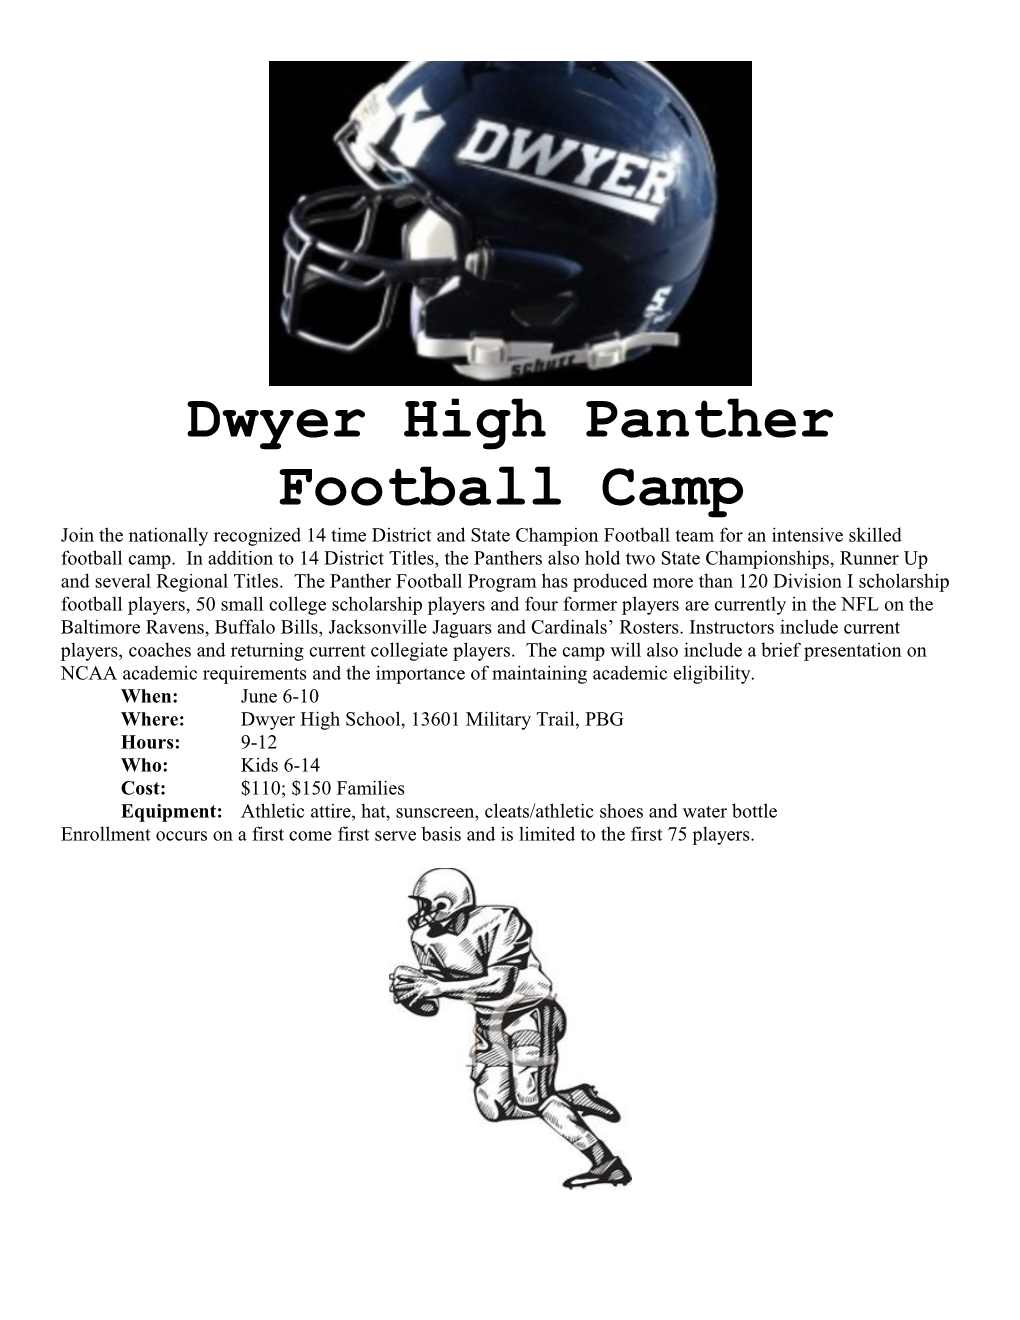 Dwyer Panther Football Camp